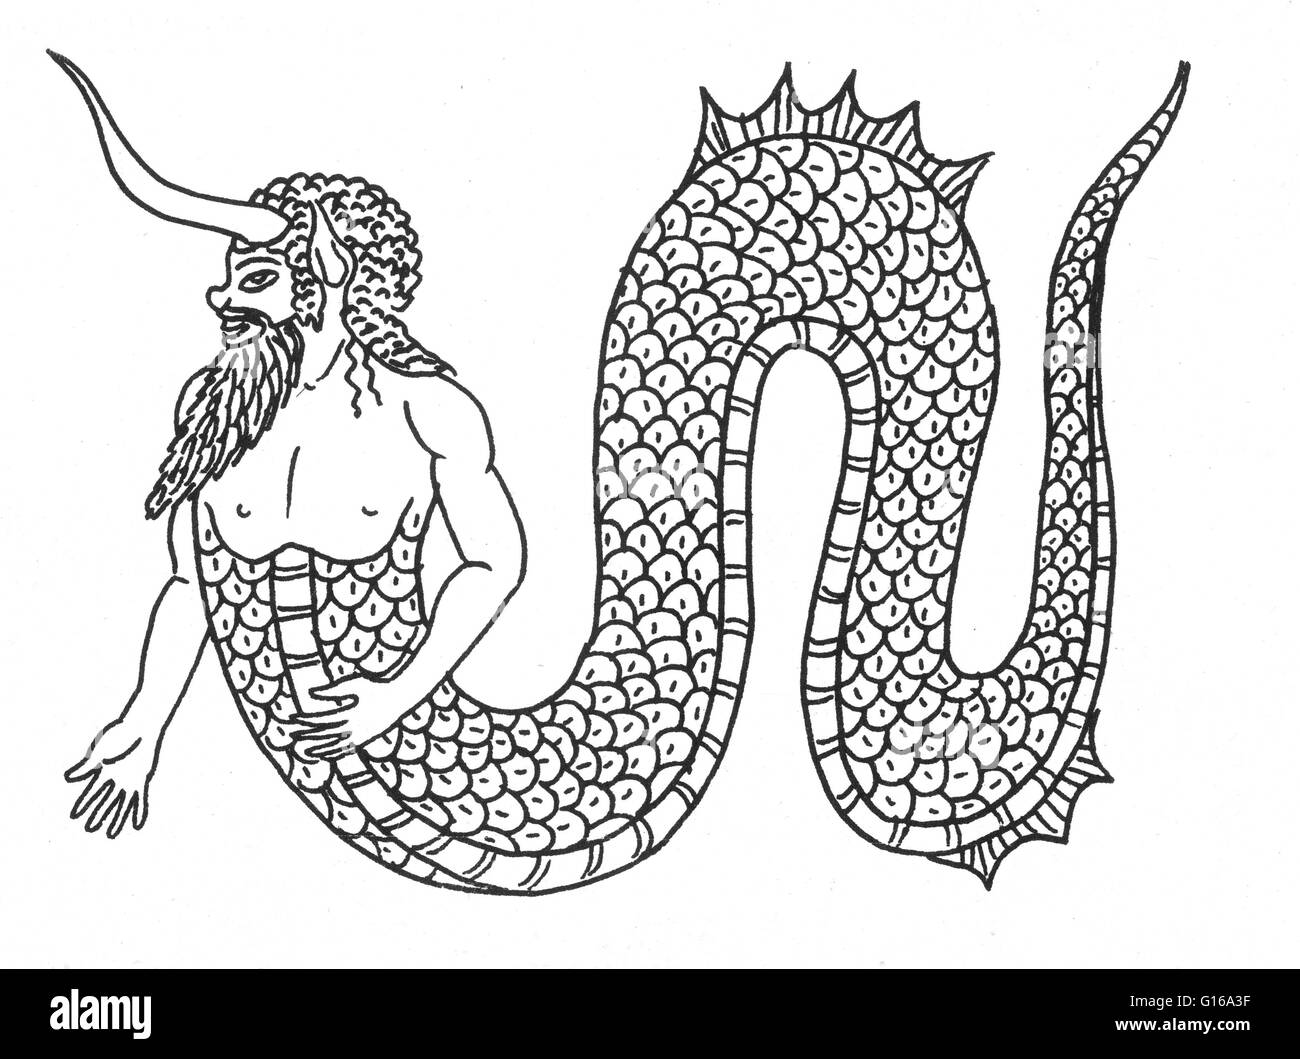 Mermen are mythical male equivalents and counterparts of mermaids, legendary creatures who have the form of a male human from the waist up and are fish-like from the waist down, having scaly fish tails in place of legs. The actions and behavior of mermen Stock Photo